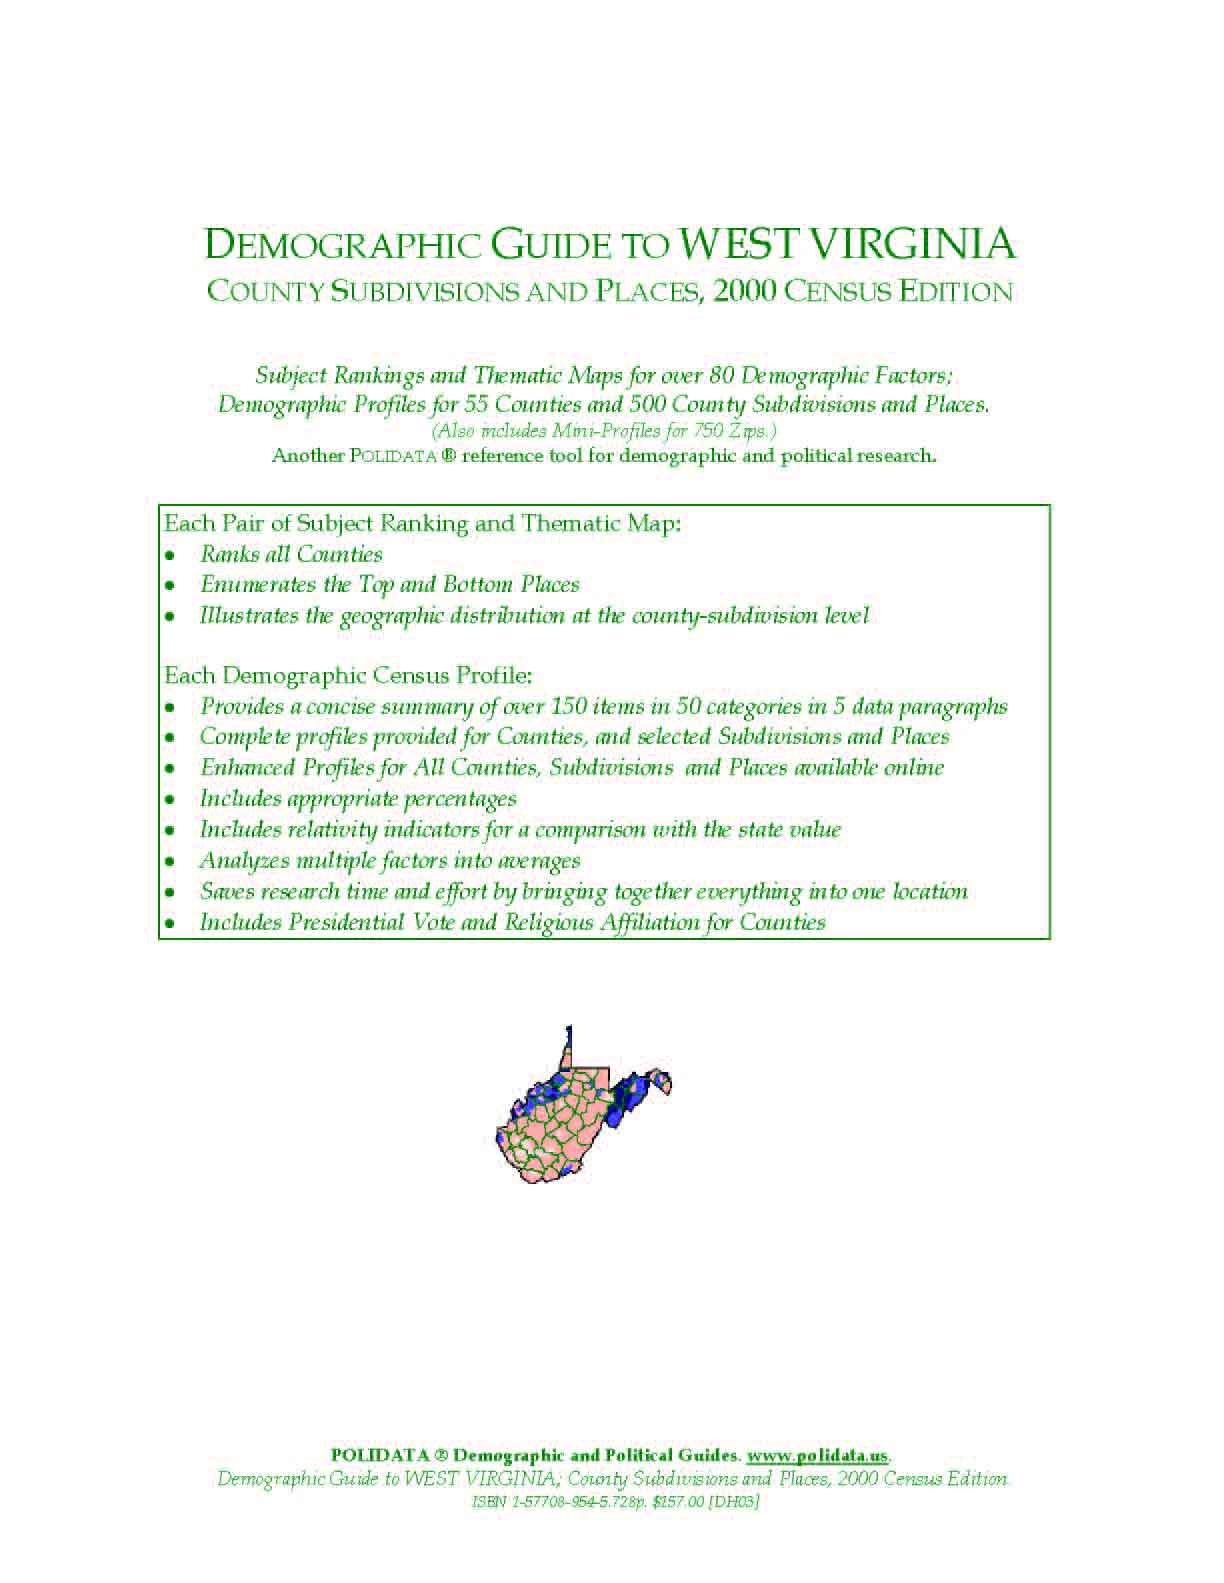 dorothy tabone recommends west virginia back pages pic